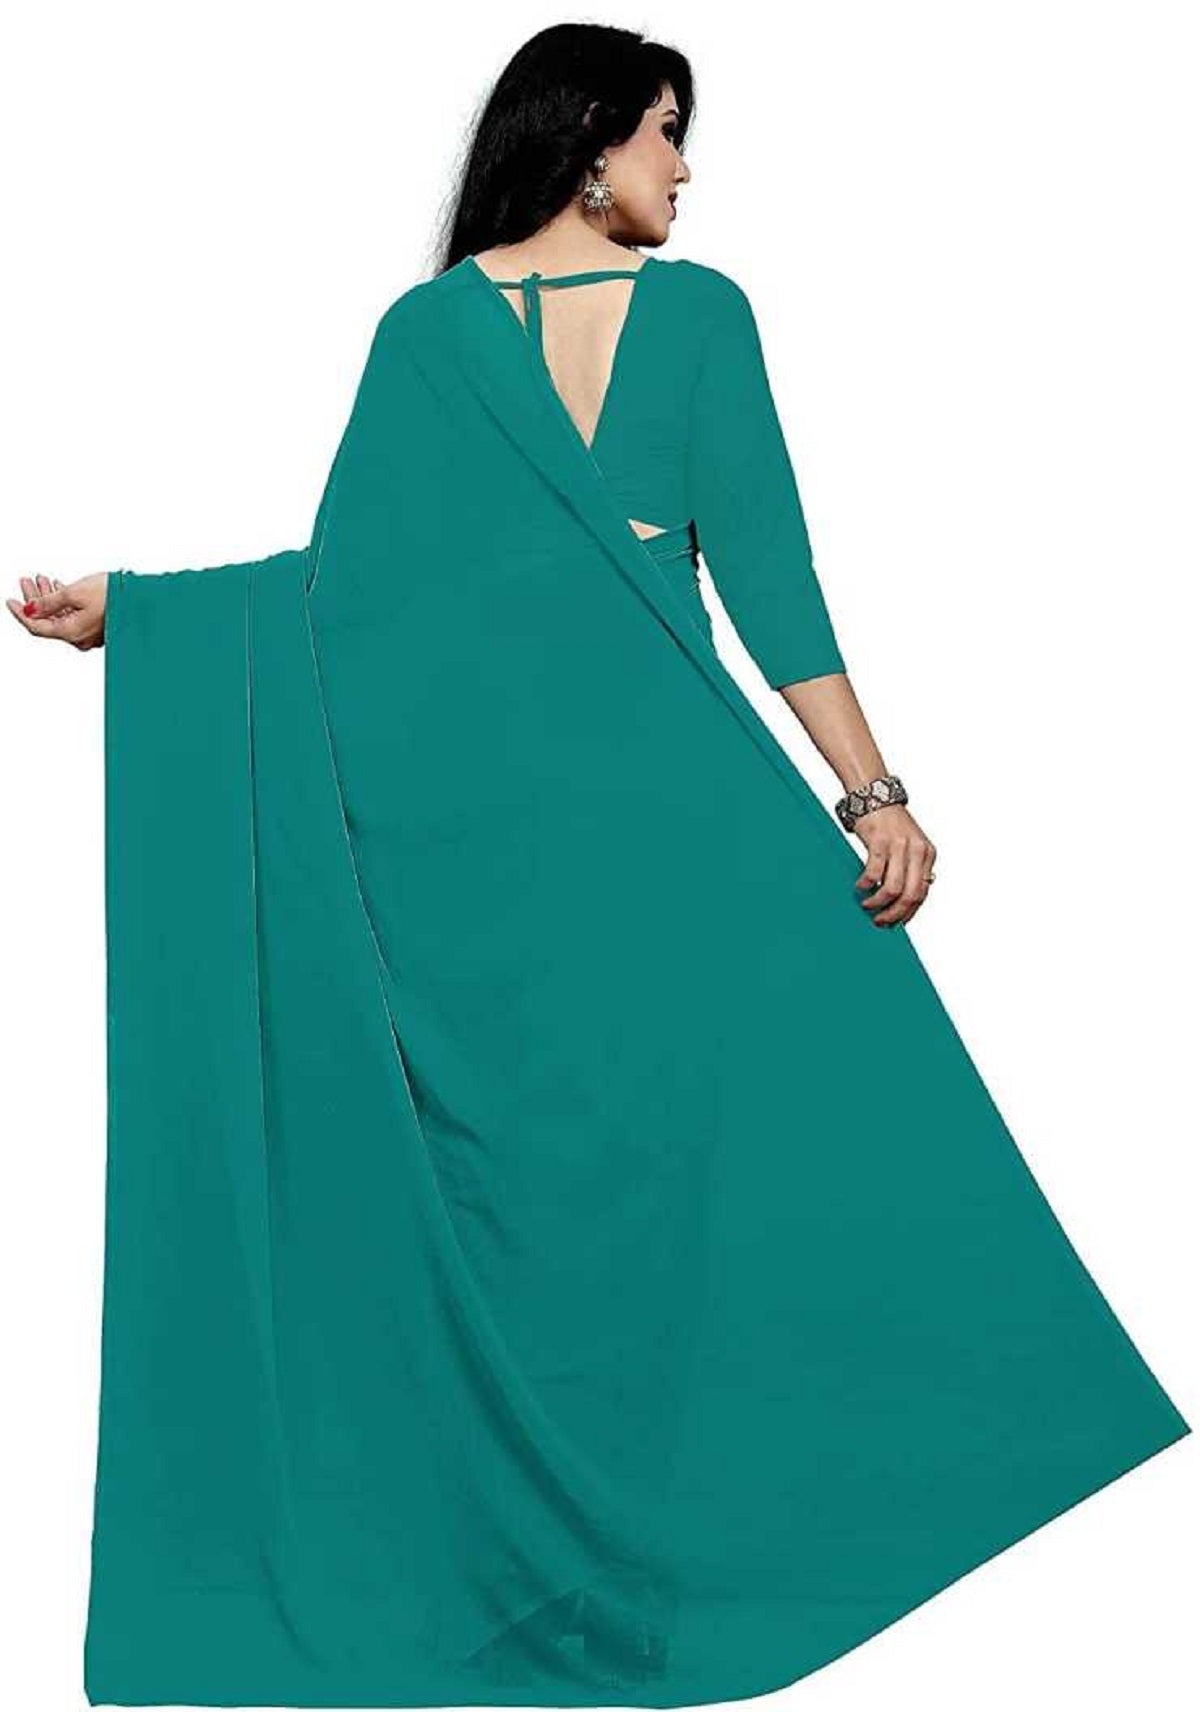 Women's Plain Woven Daily Wear  Formal Georgette Sari With Blouse Piece (Teal Blue) - NIMIDHYA